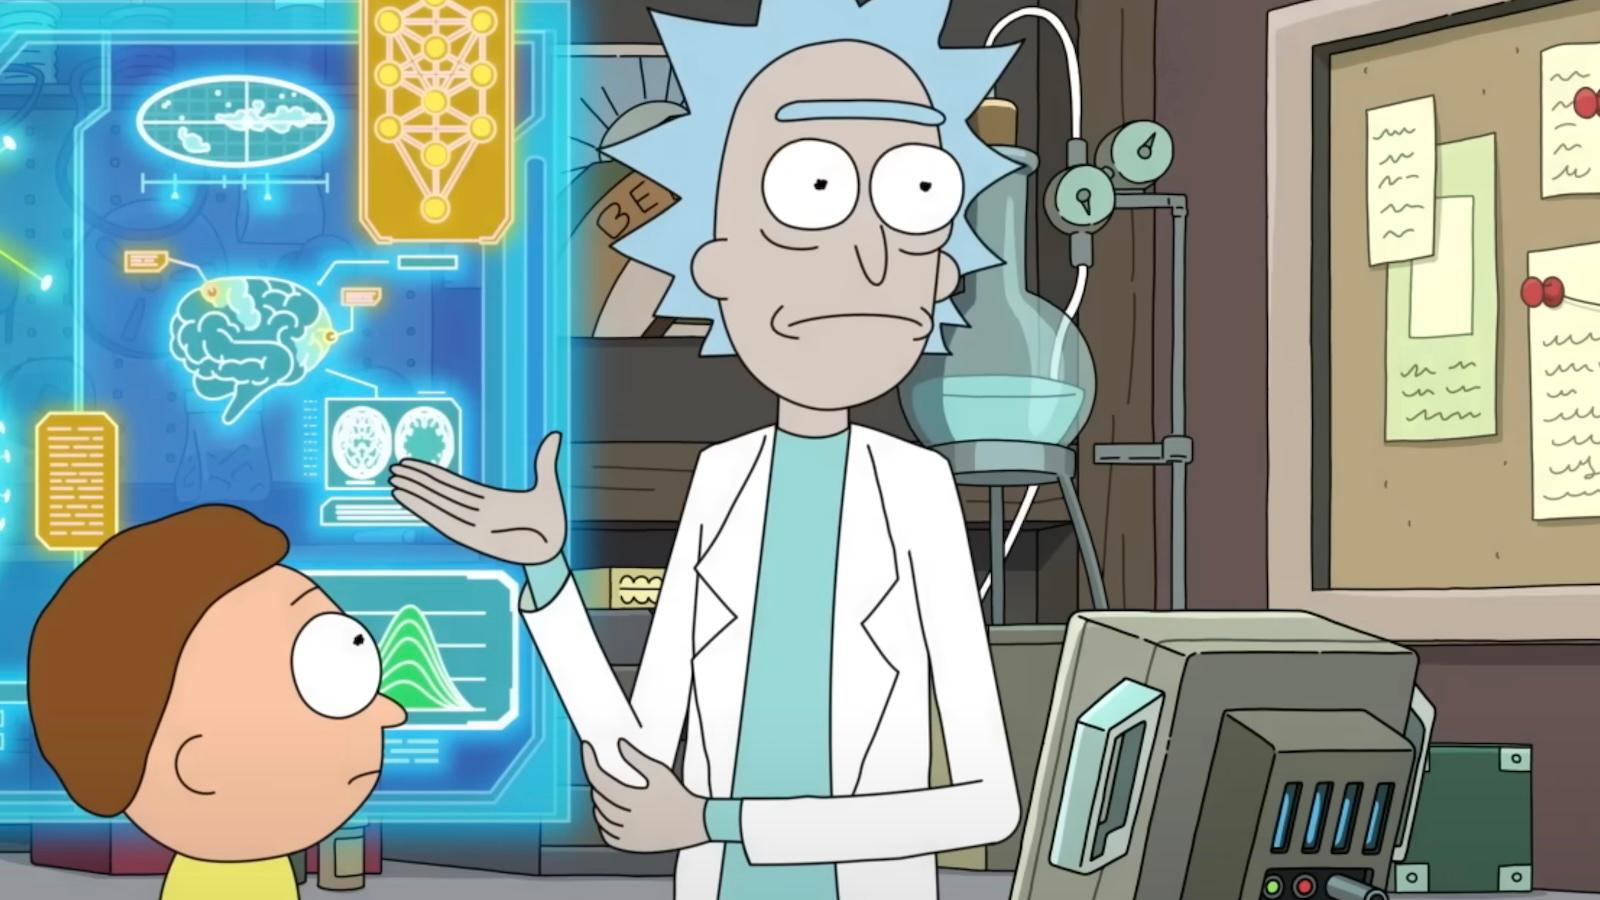 How To Watch 'Rick and Morty' Season 7 Without Cable